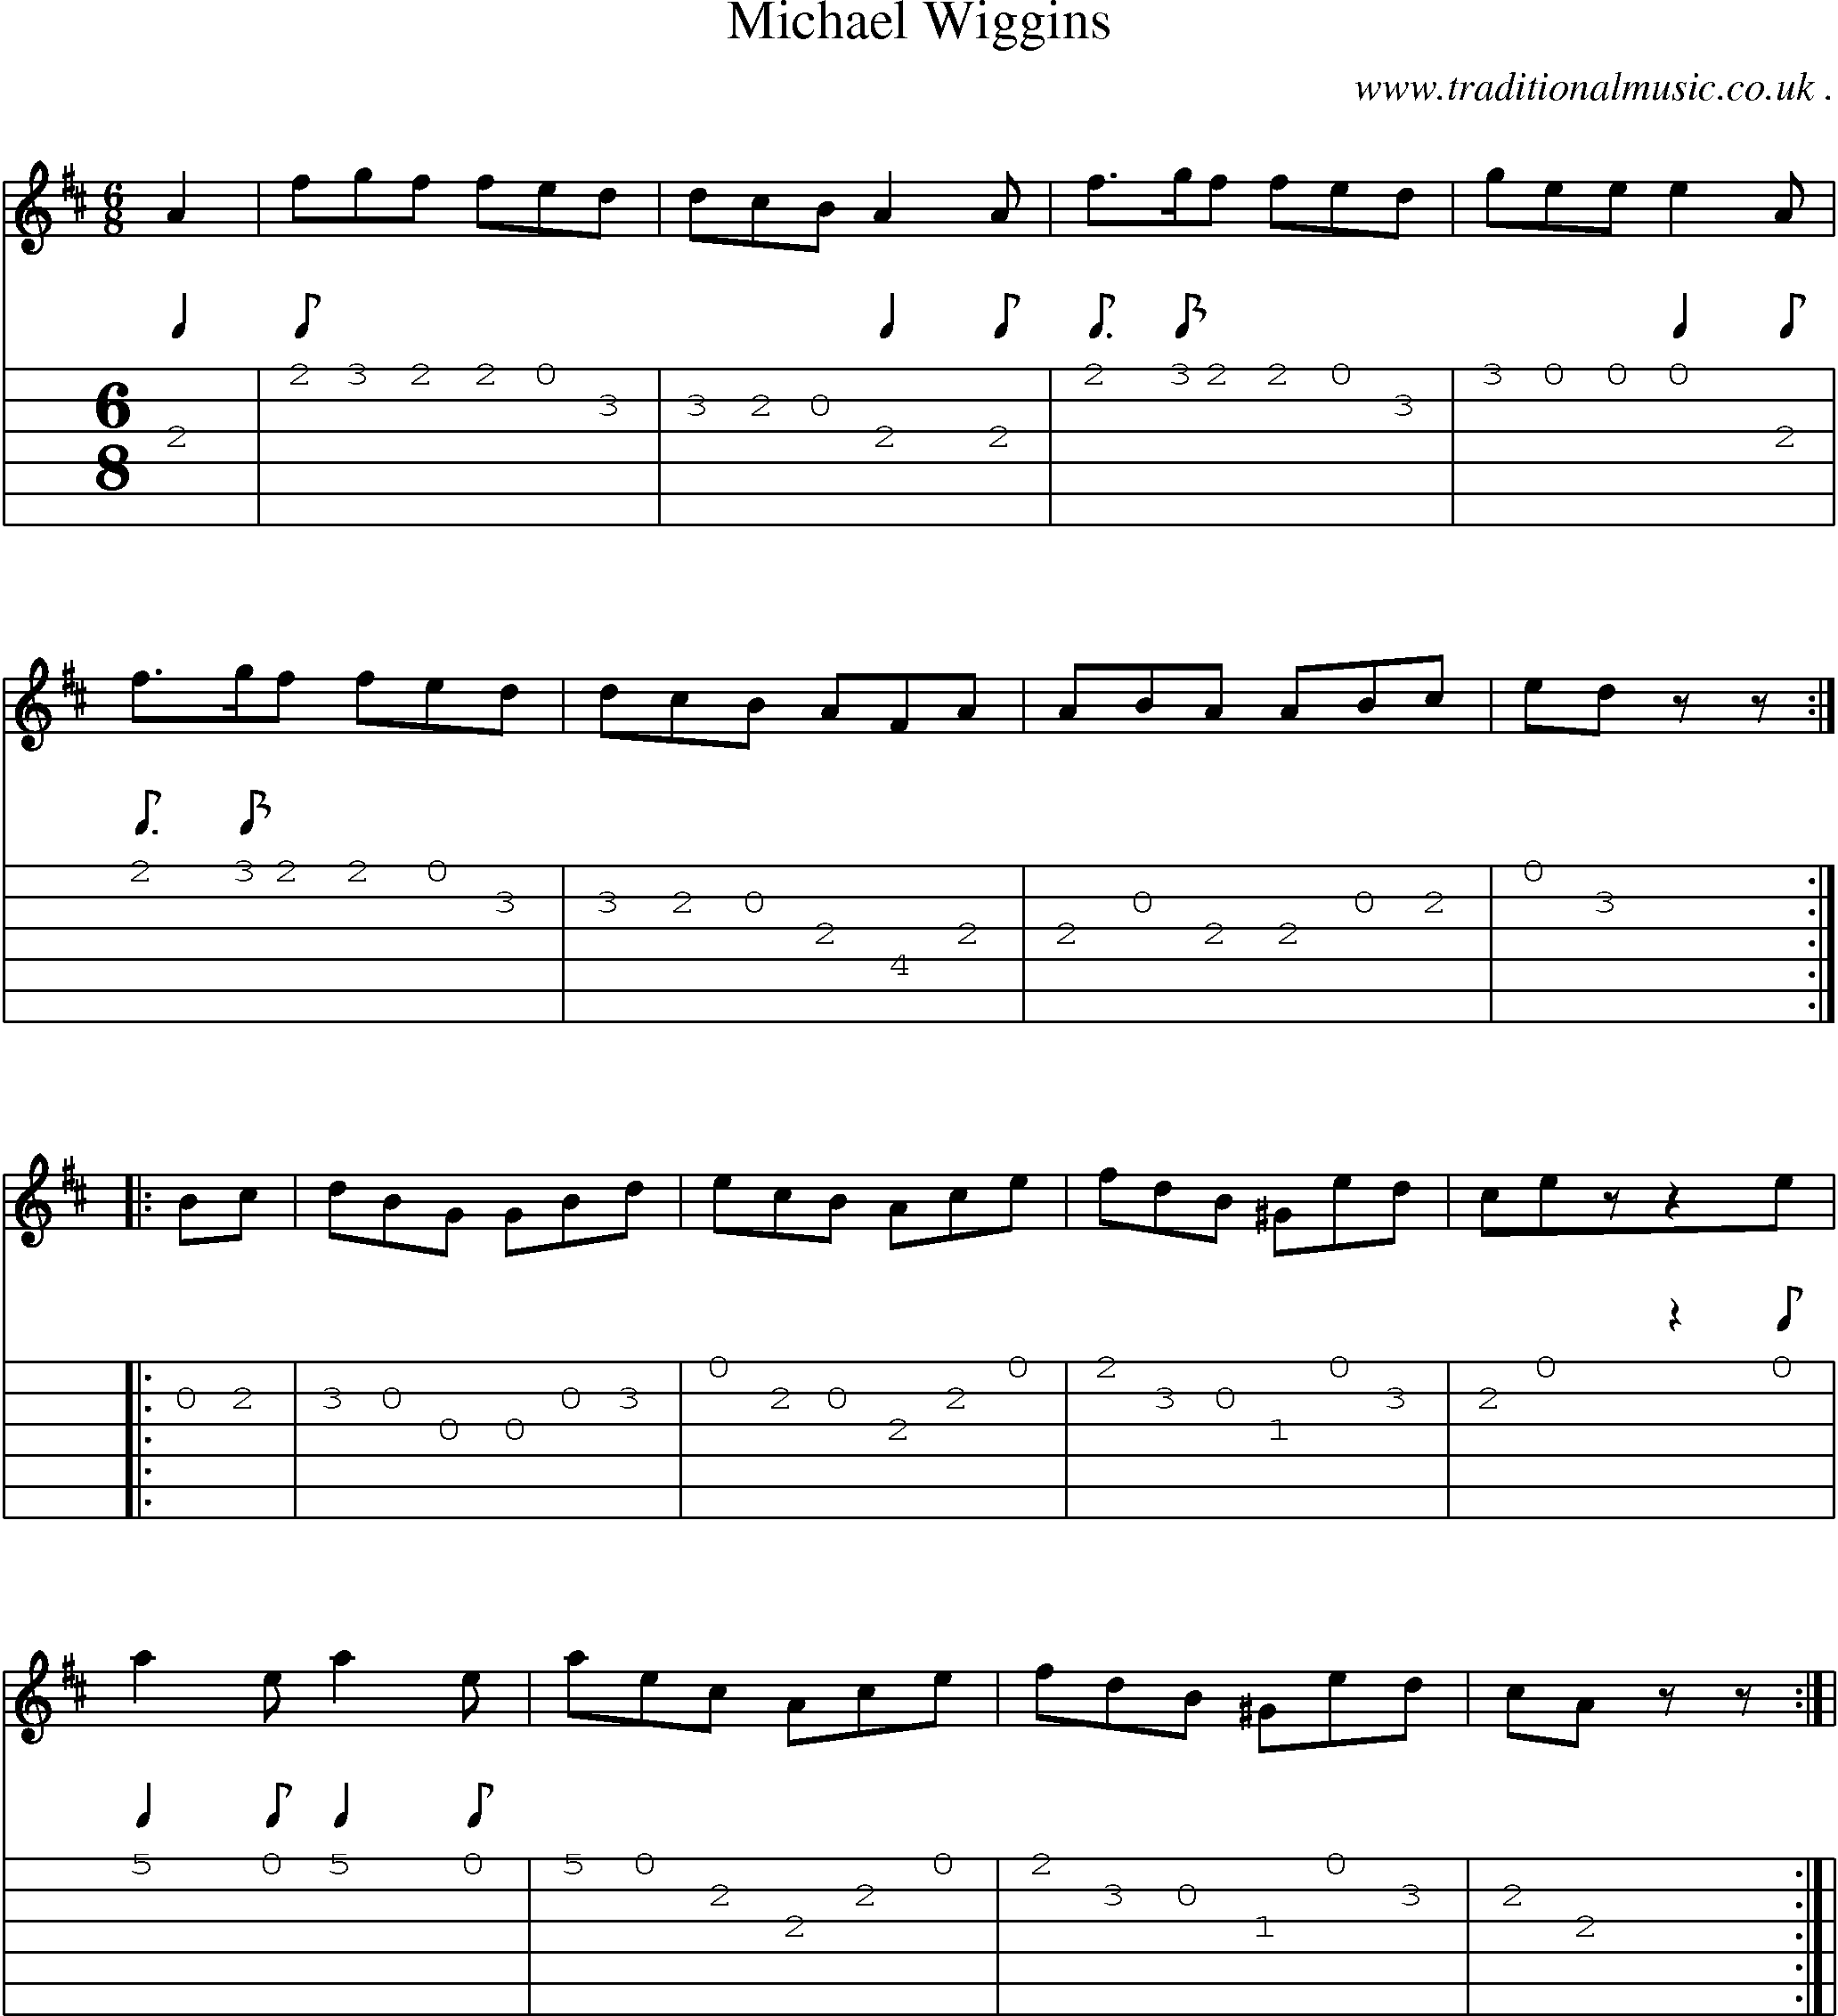 Sheet-Music and Guitar Tabs for Michael Wiggins